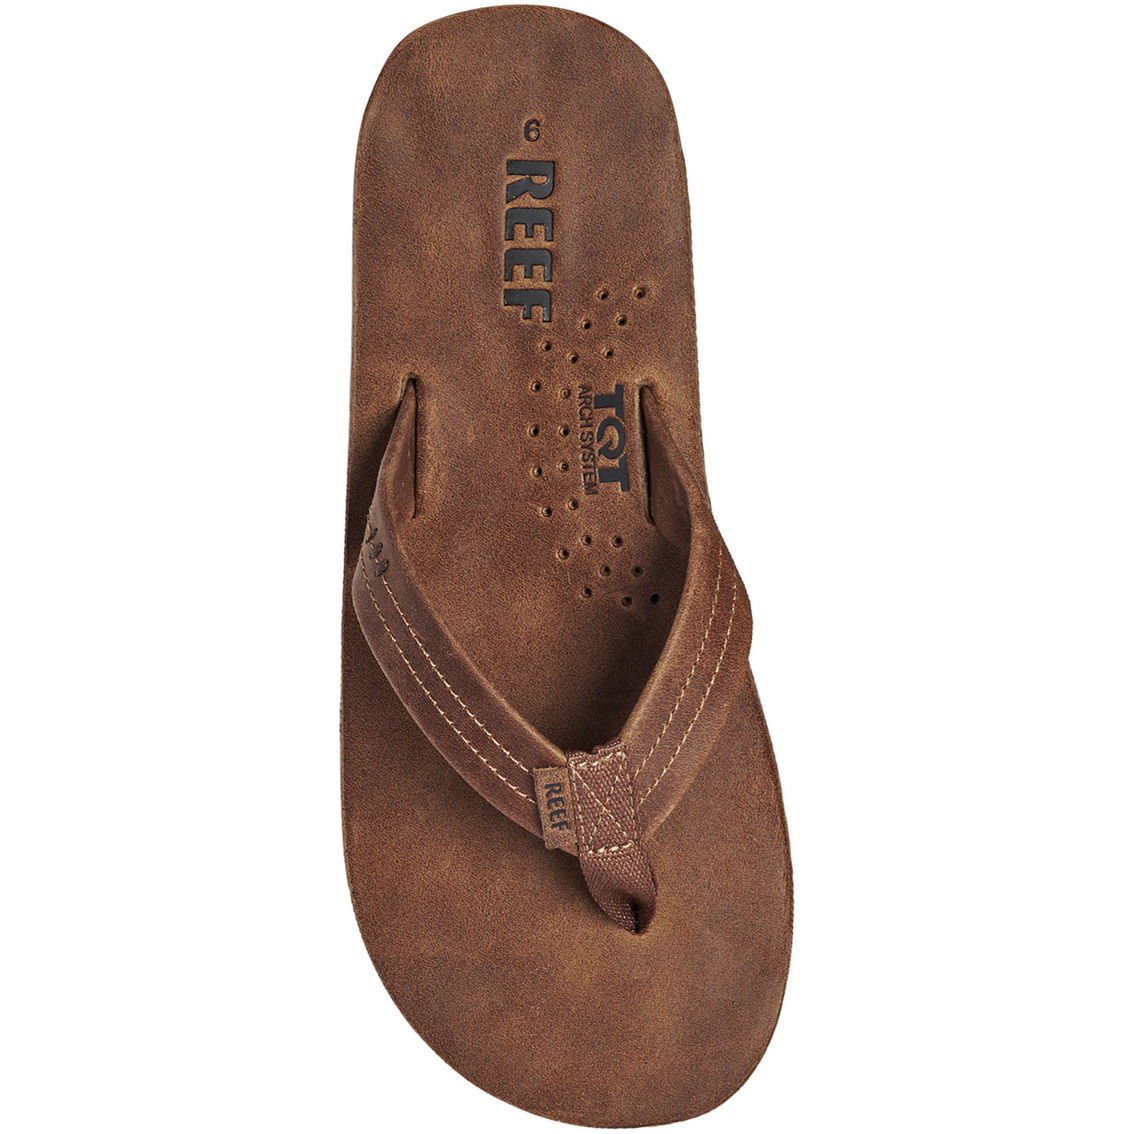 Reef Men's Surf and Saddle Tan Leather Sandals Flip Flop Shoes Size 7 US Beach 